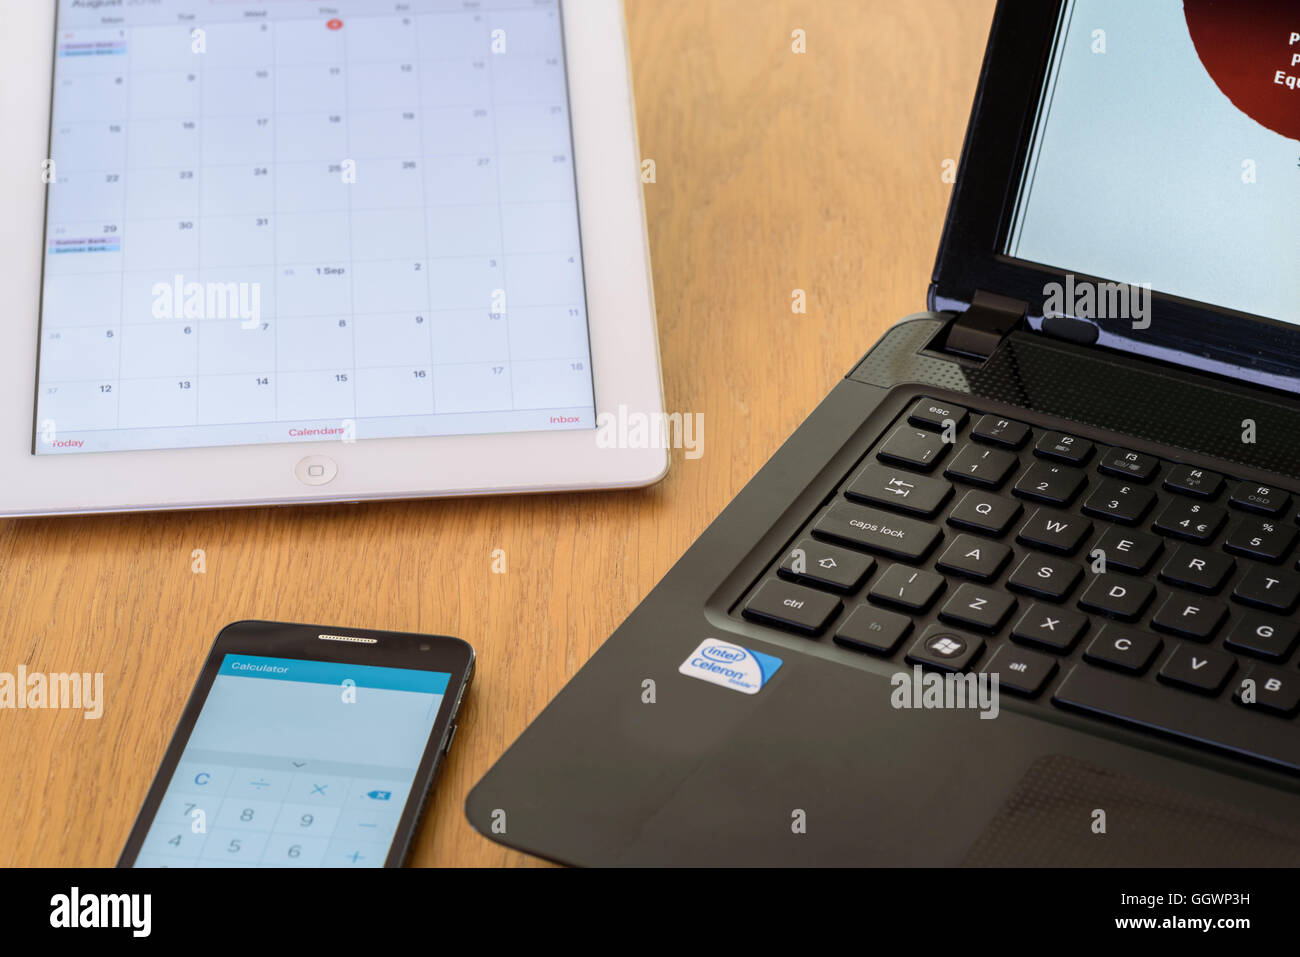 Laptop, tablet and smart phone. Stock Photo